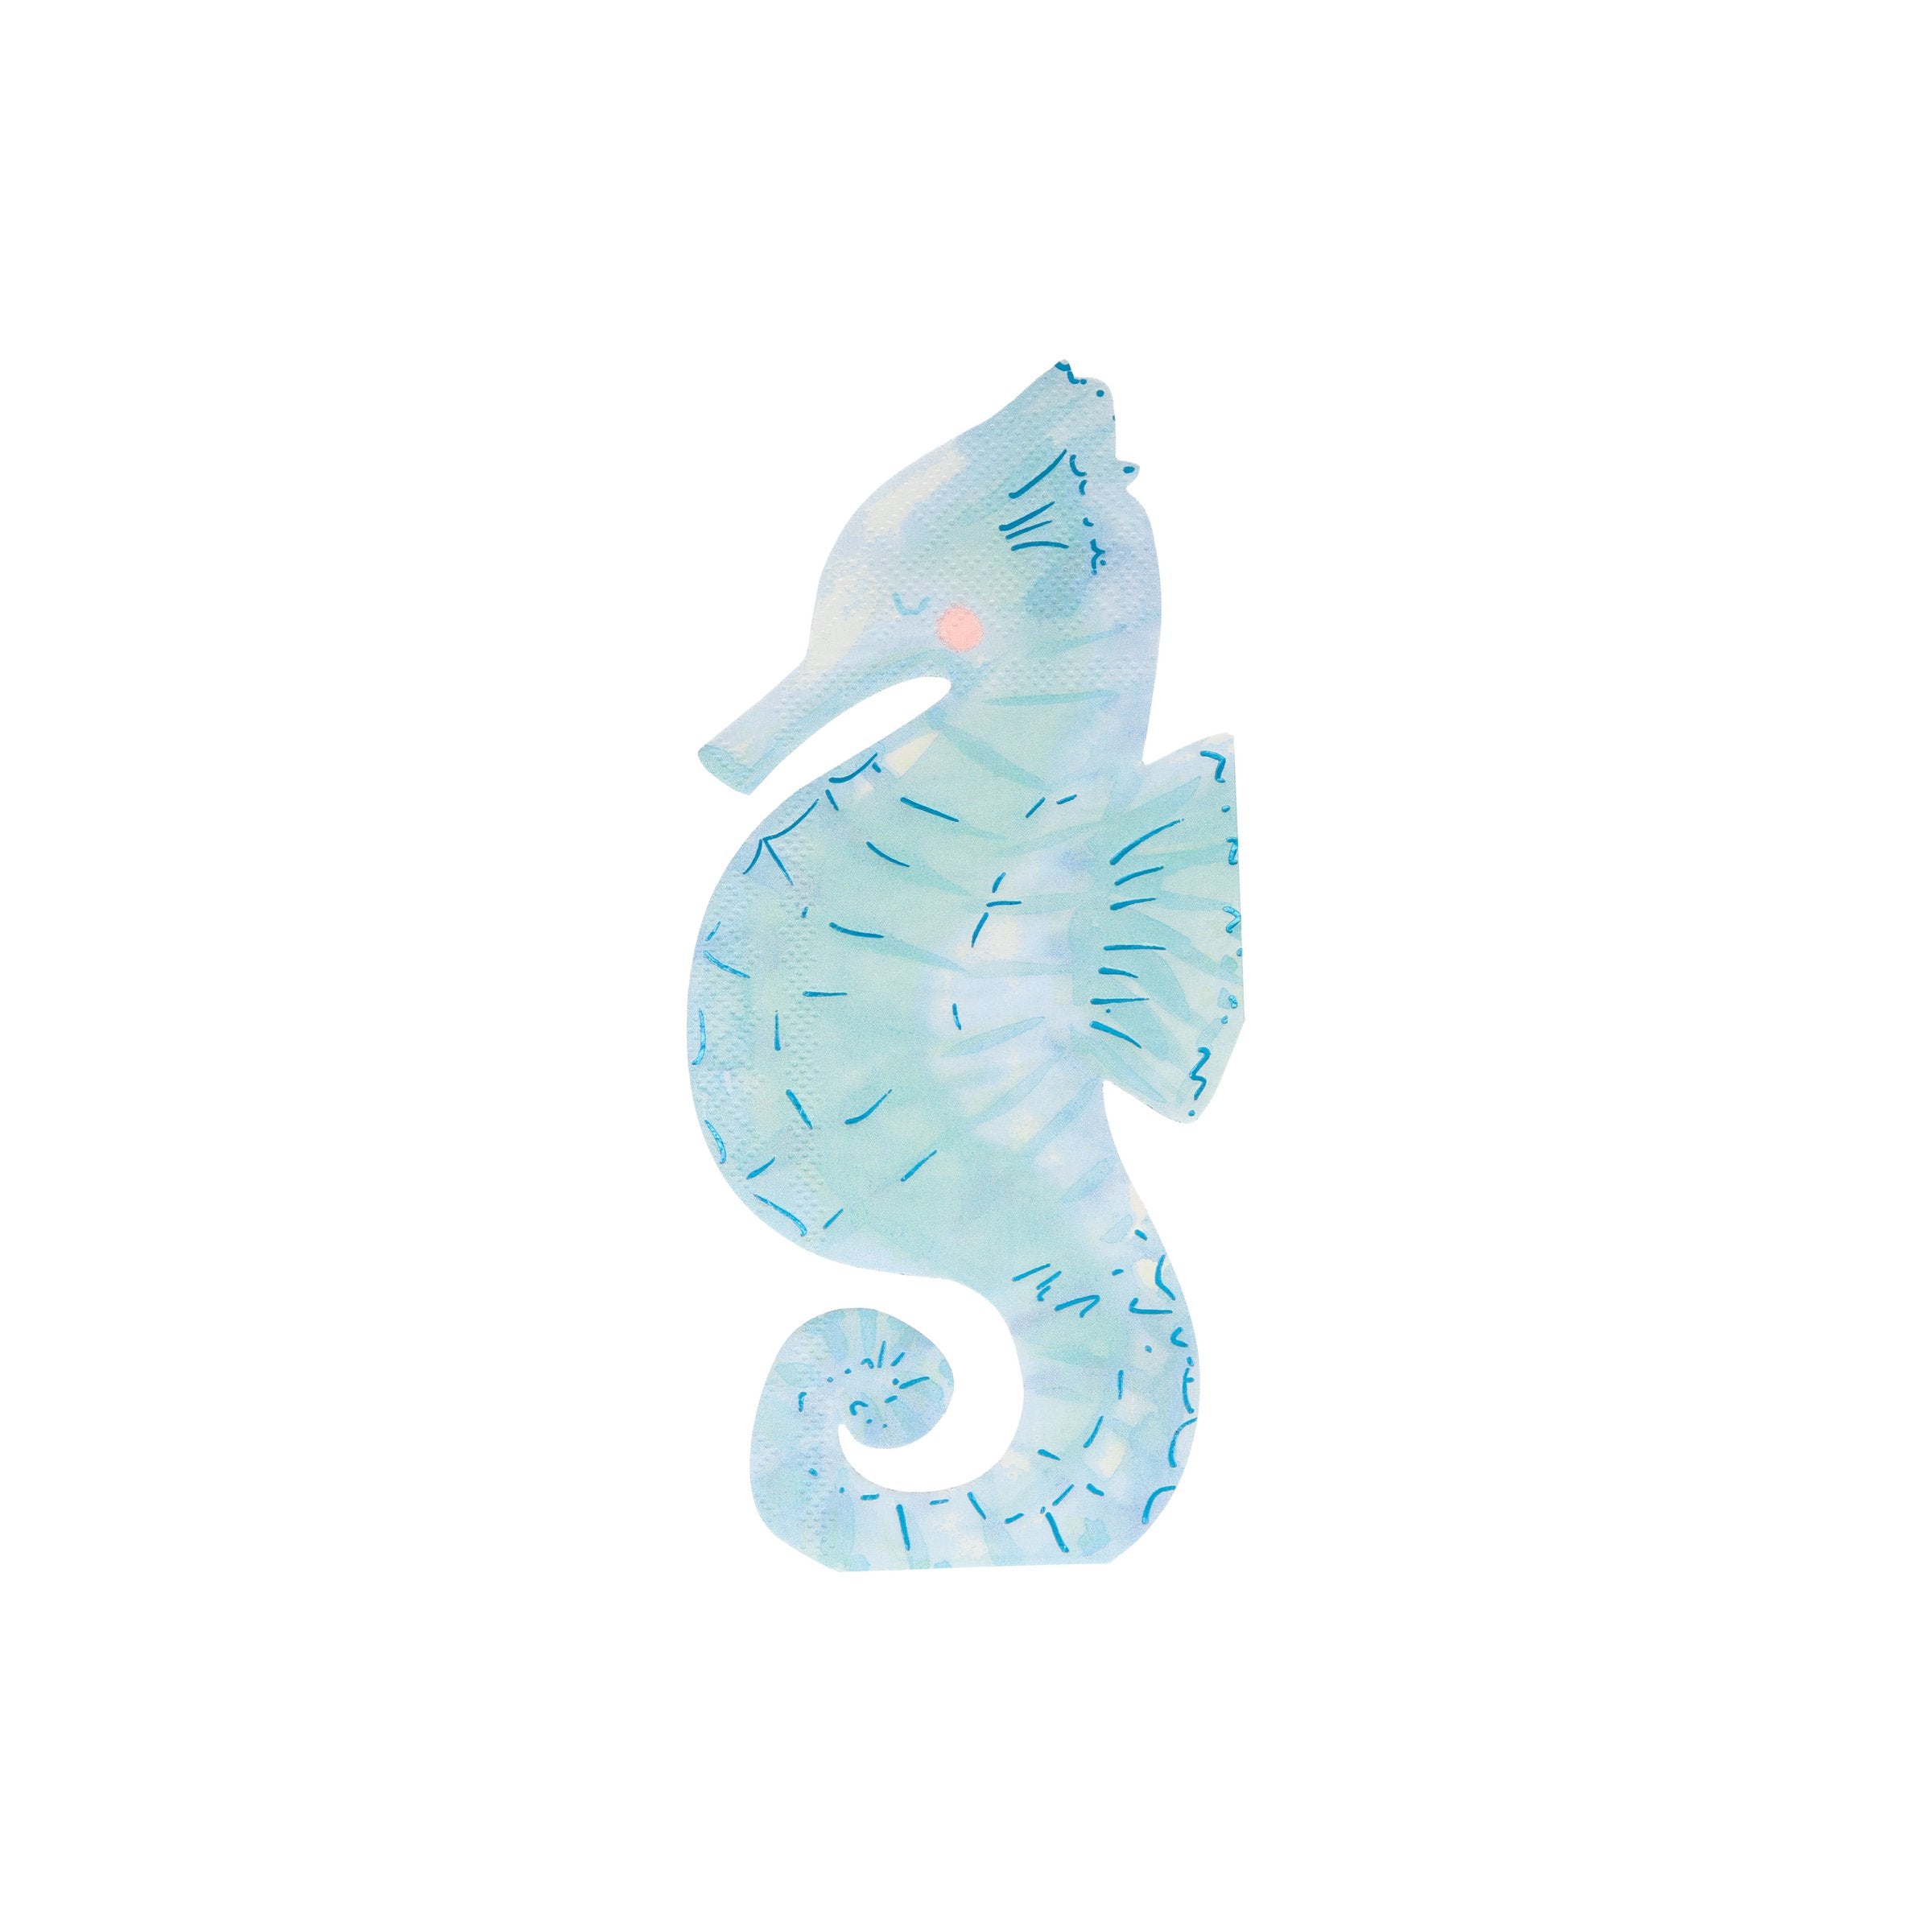 Our beautiful blue seahorse napkins are perfect for an under the sea party.